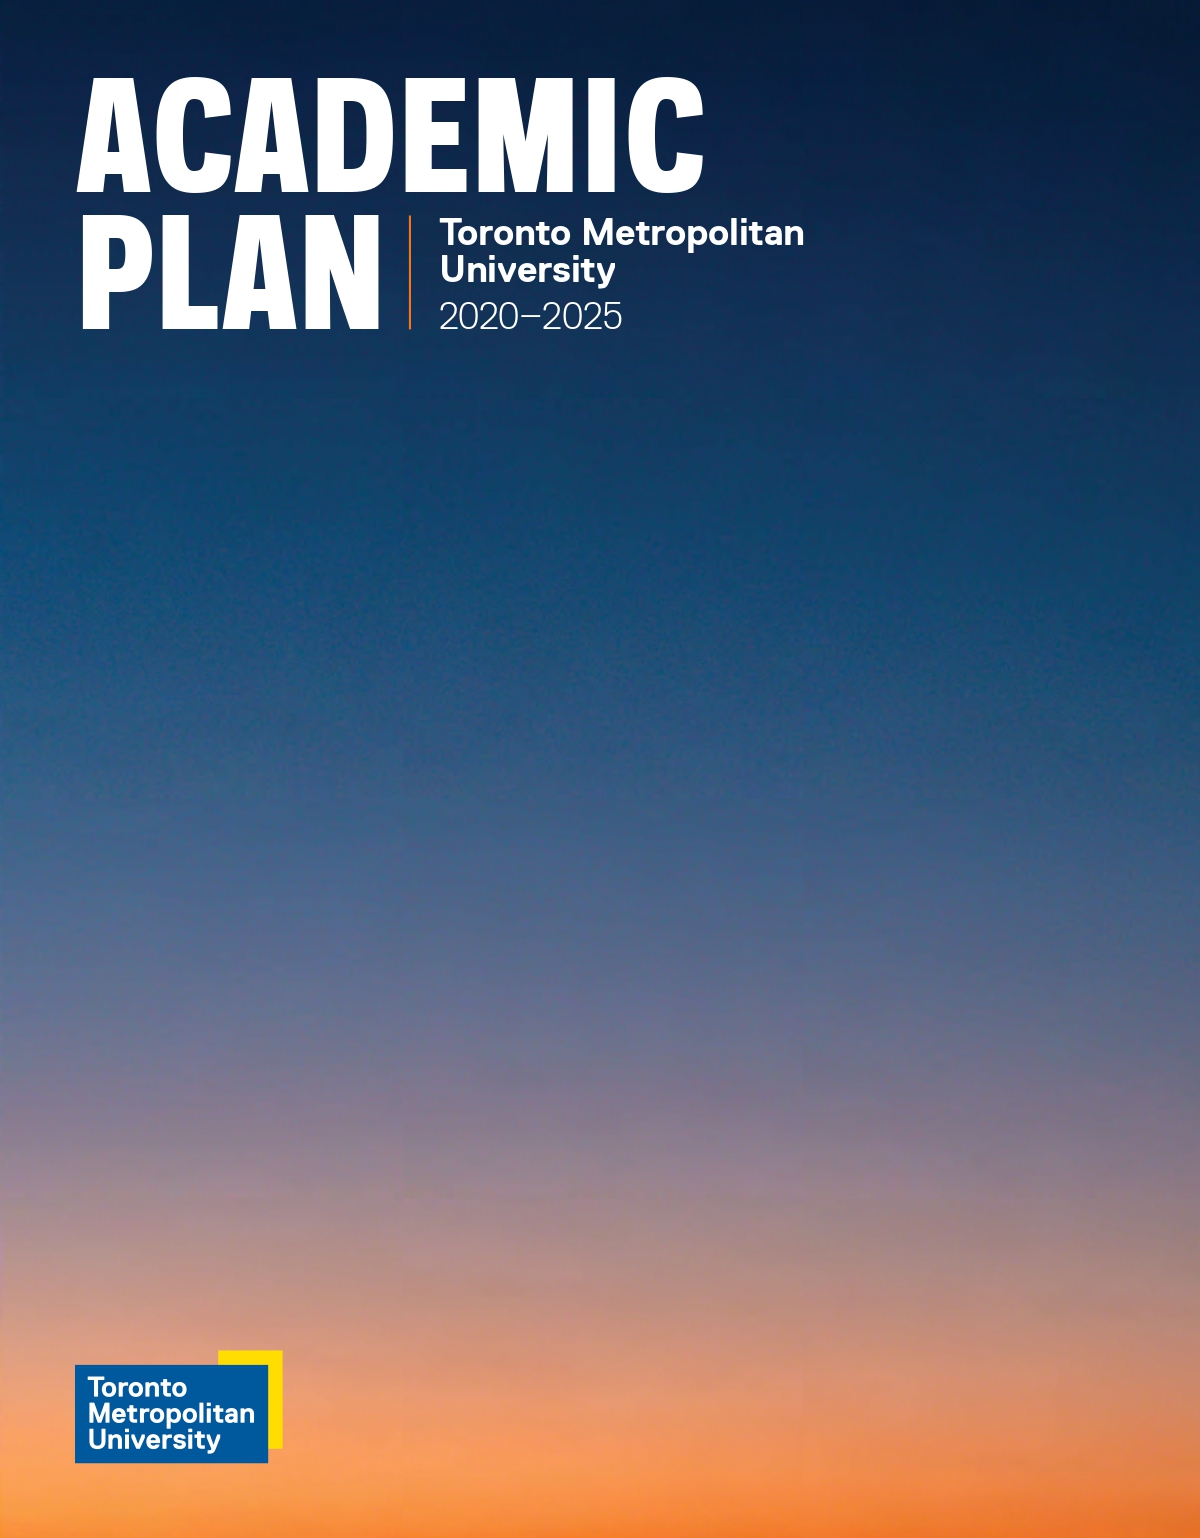 Cover of Academic Plan document 2020 - 2025